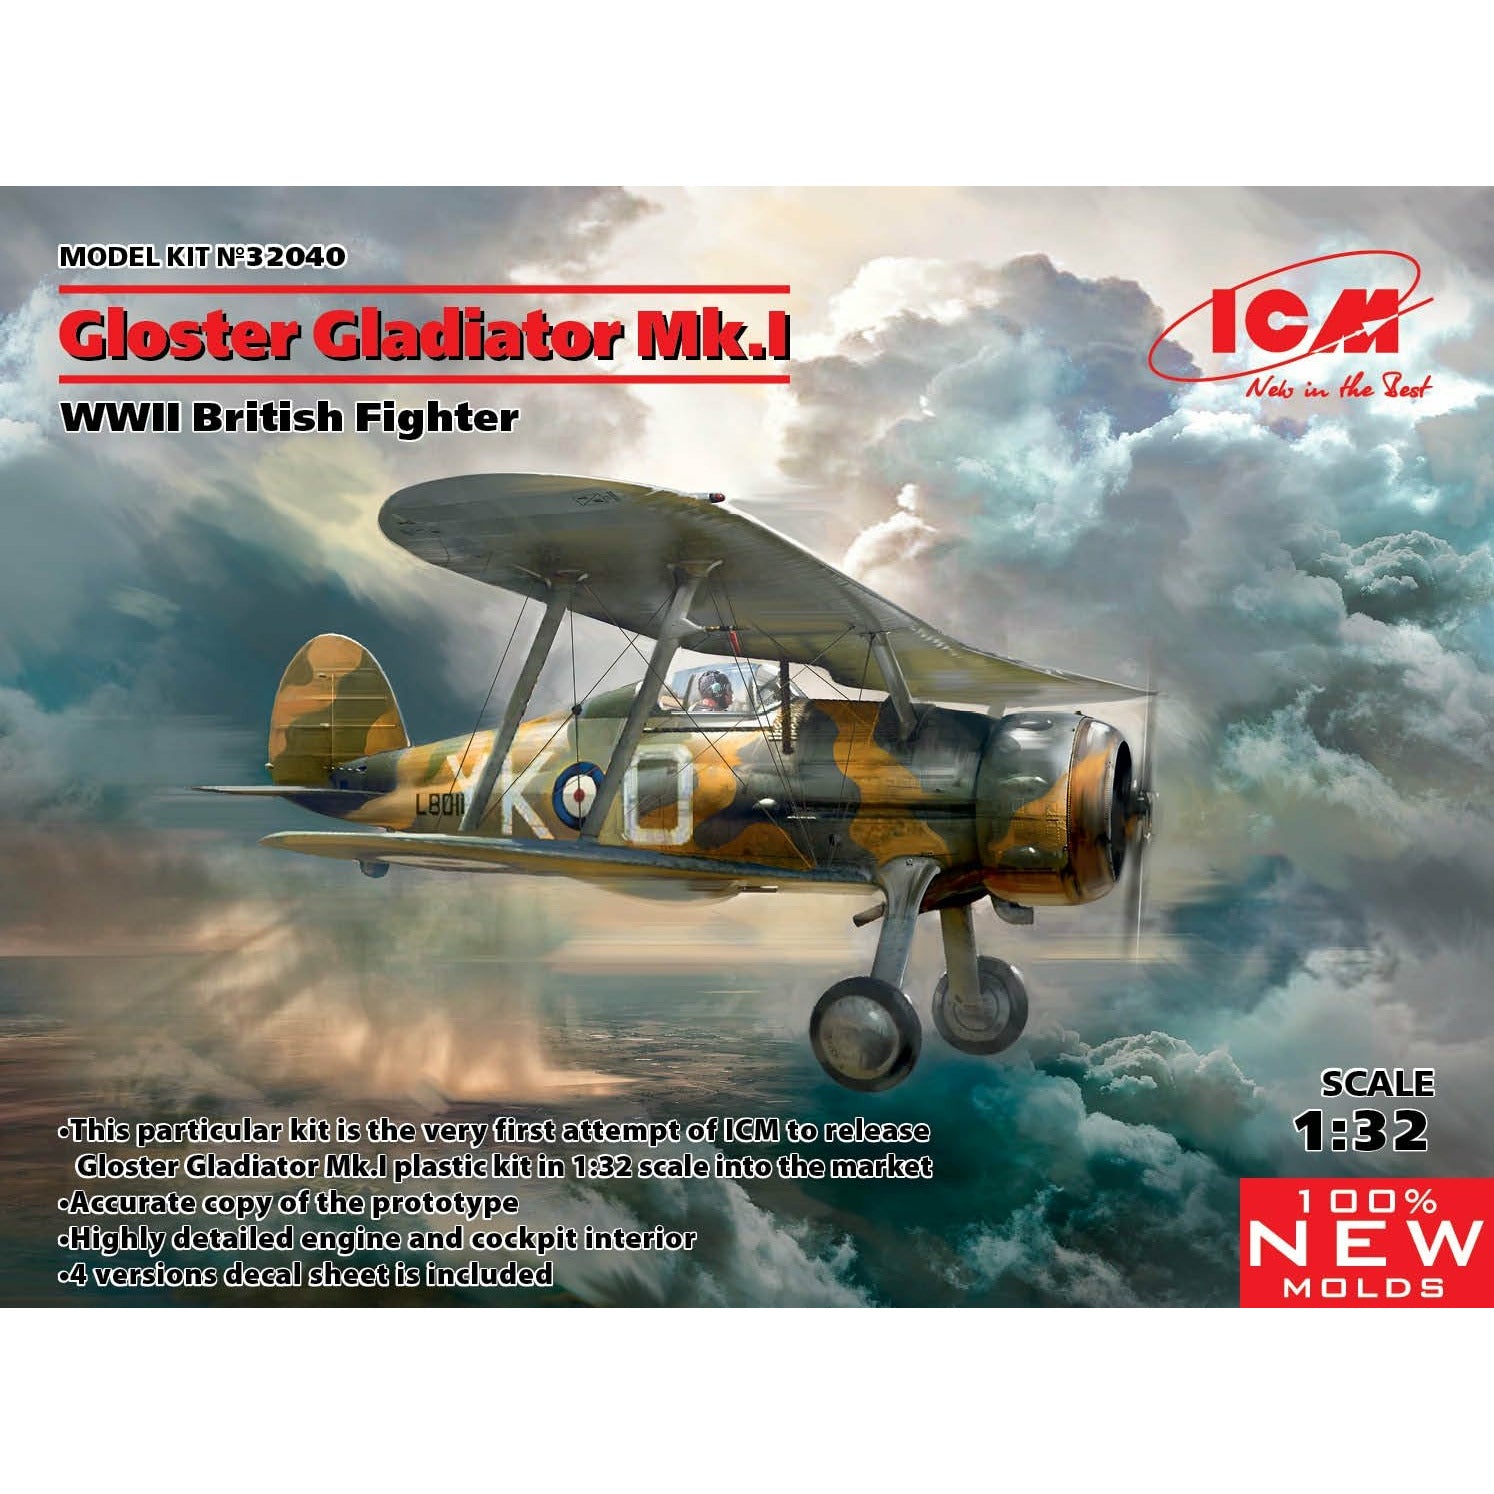 Gloster Gladiator Mk.I, WWII British Fighter (100% new molds) 1/32 #32040 by ICM